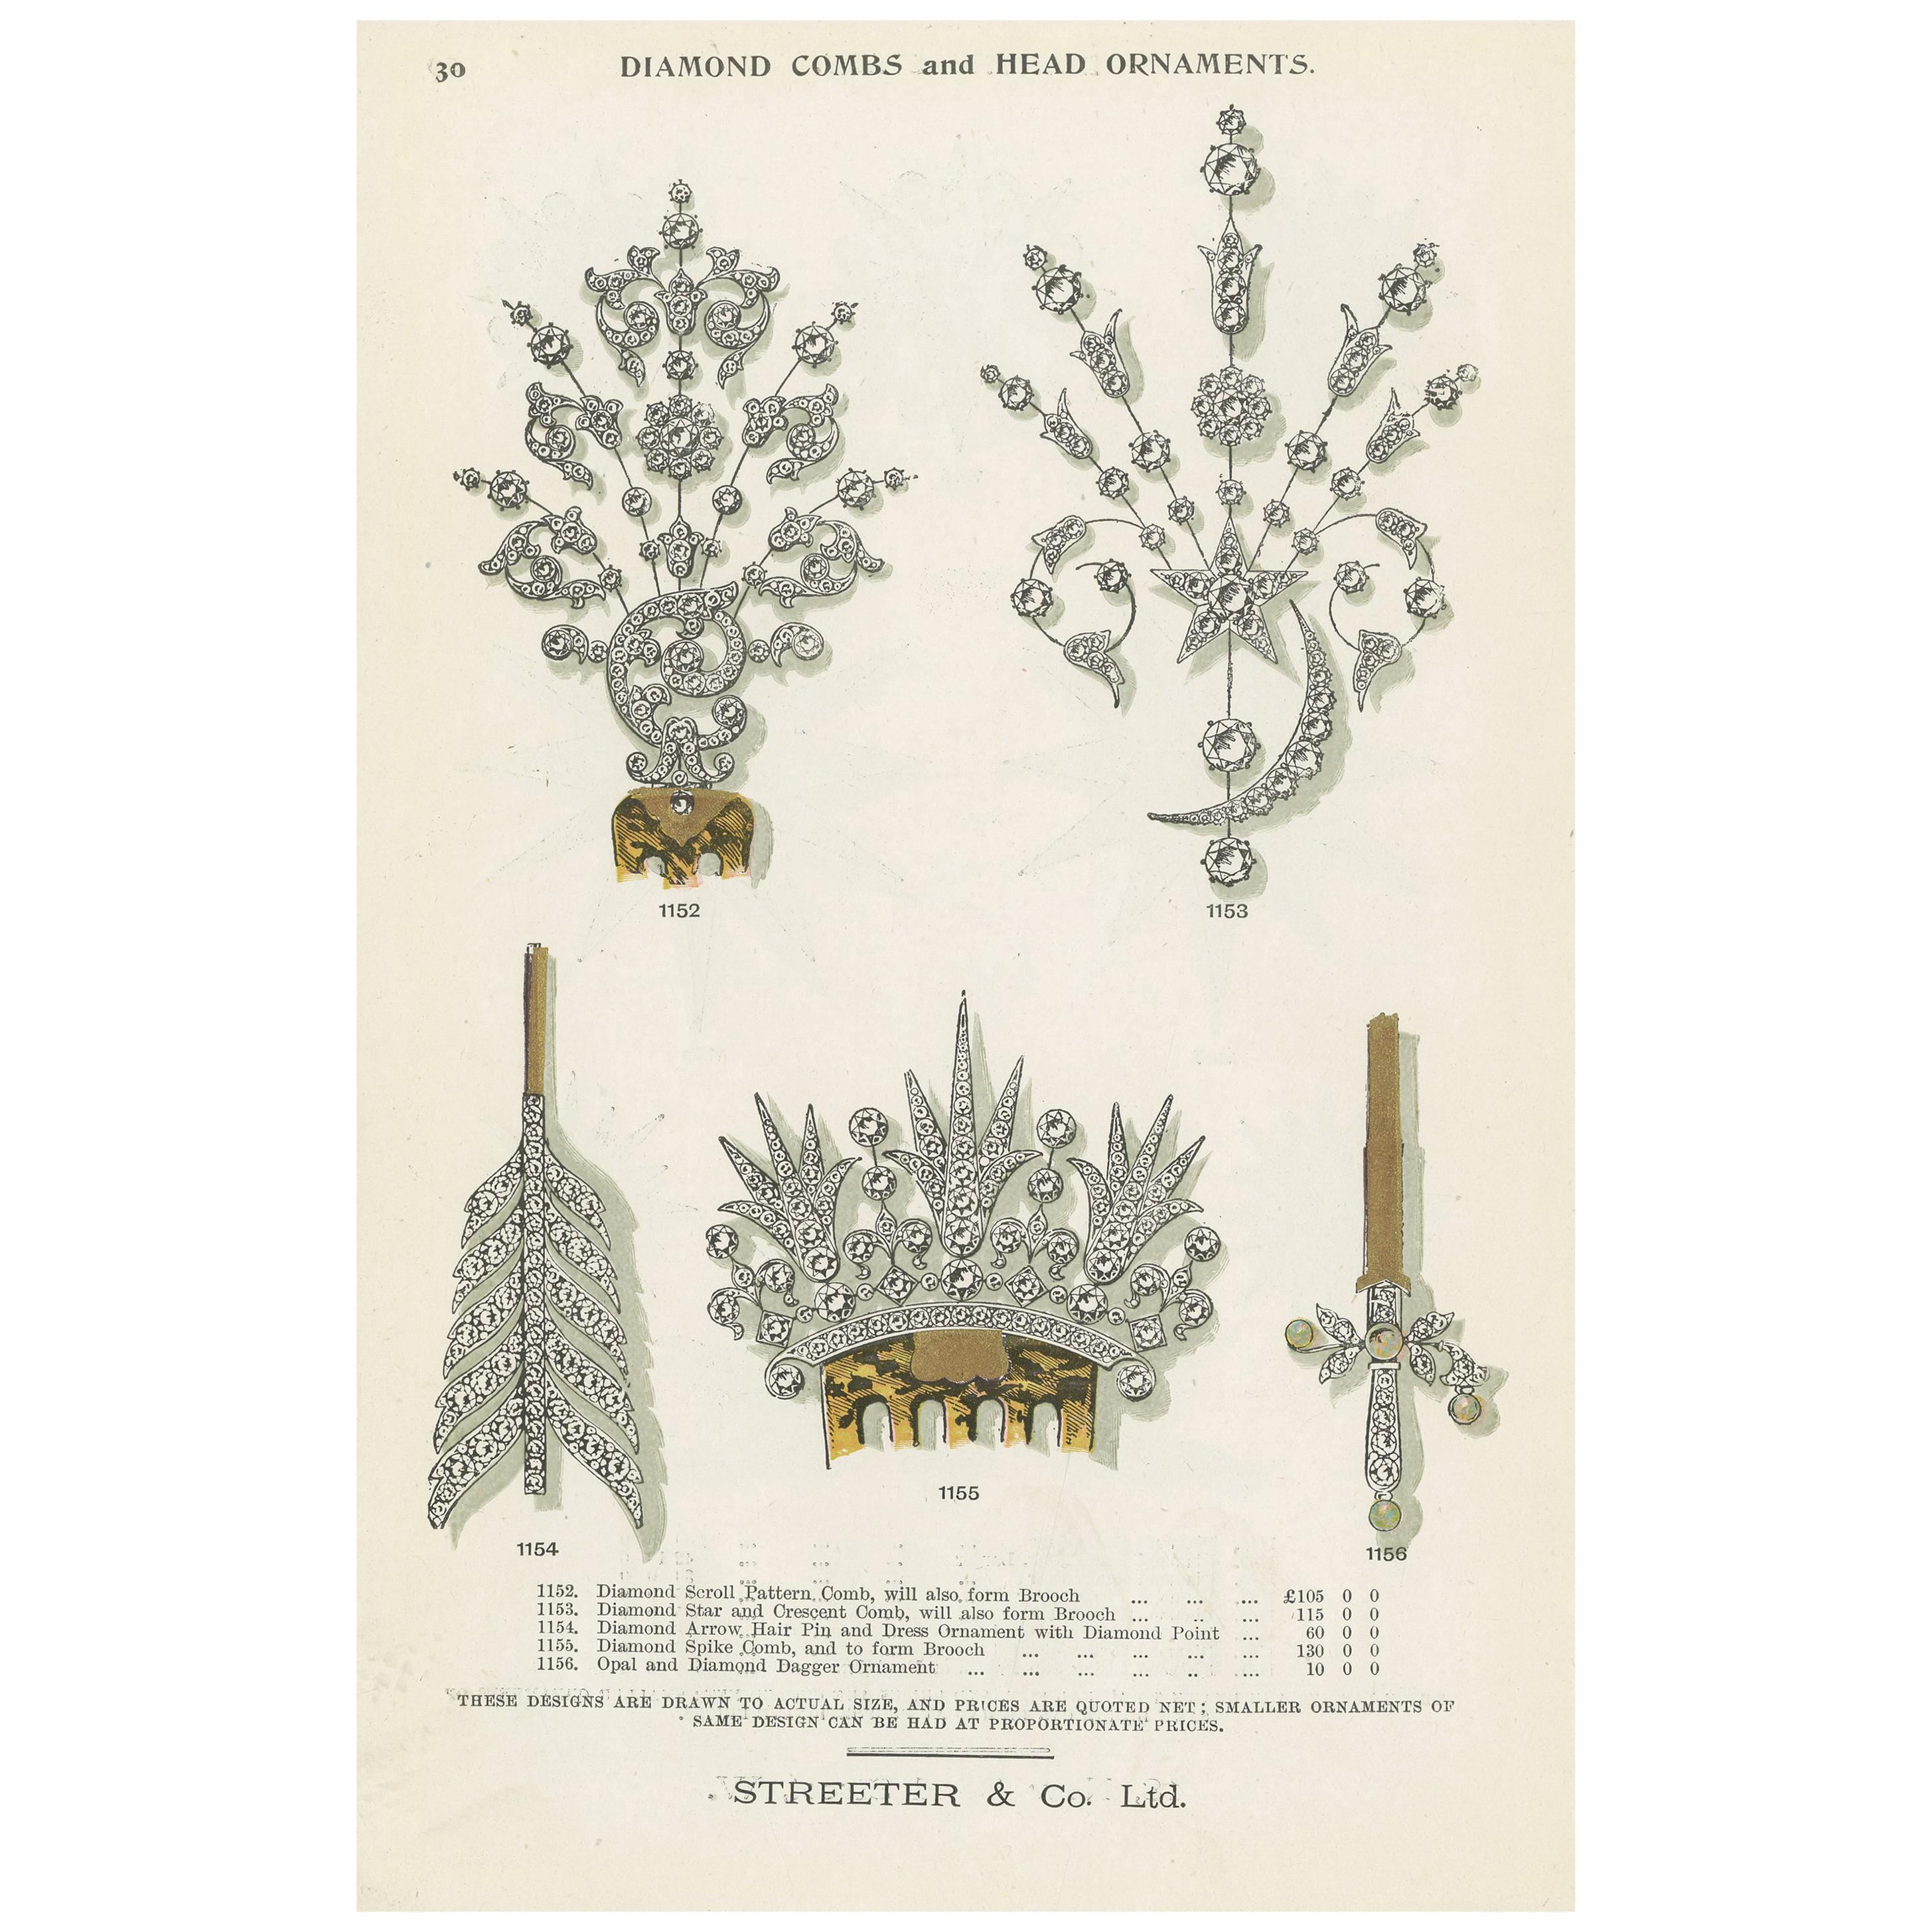 Antique Print of Diamond Combs and Head Ornaments by Streeter, '1898'